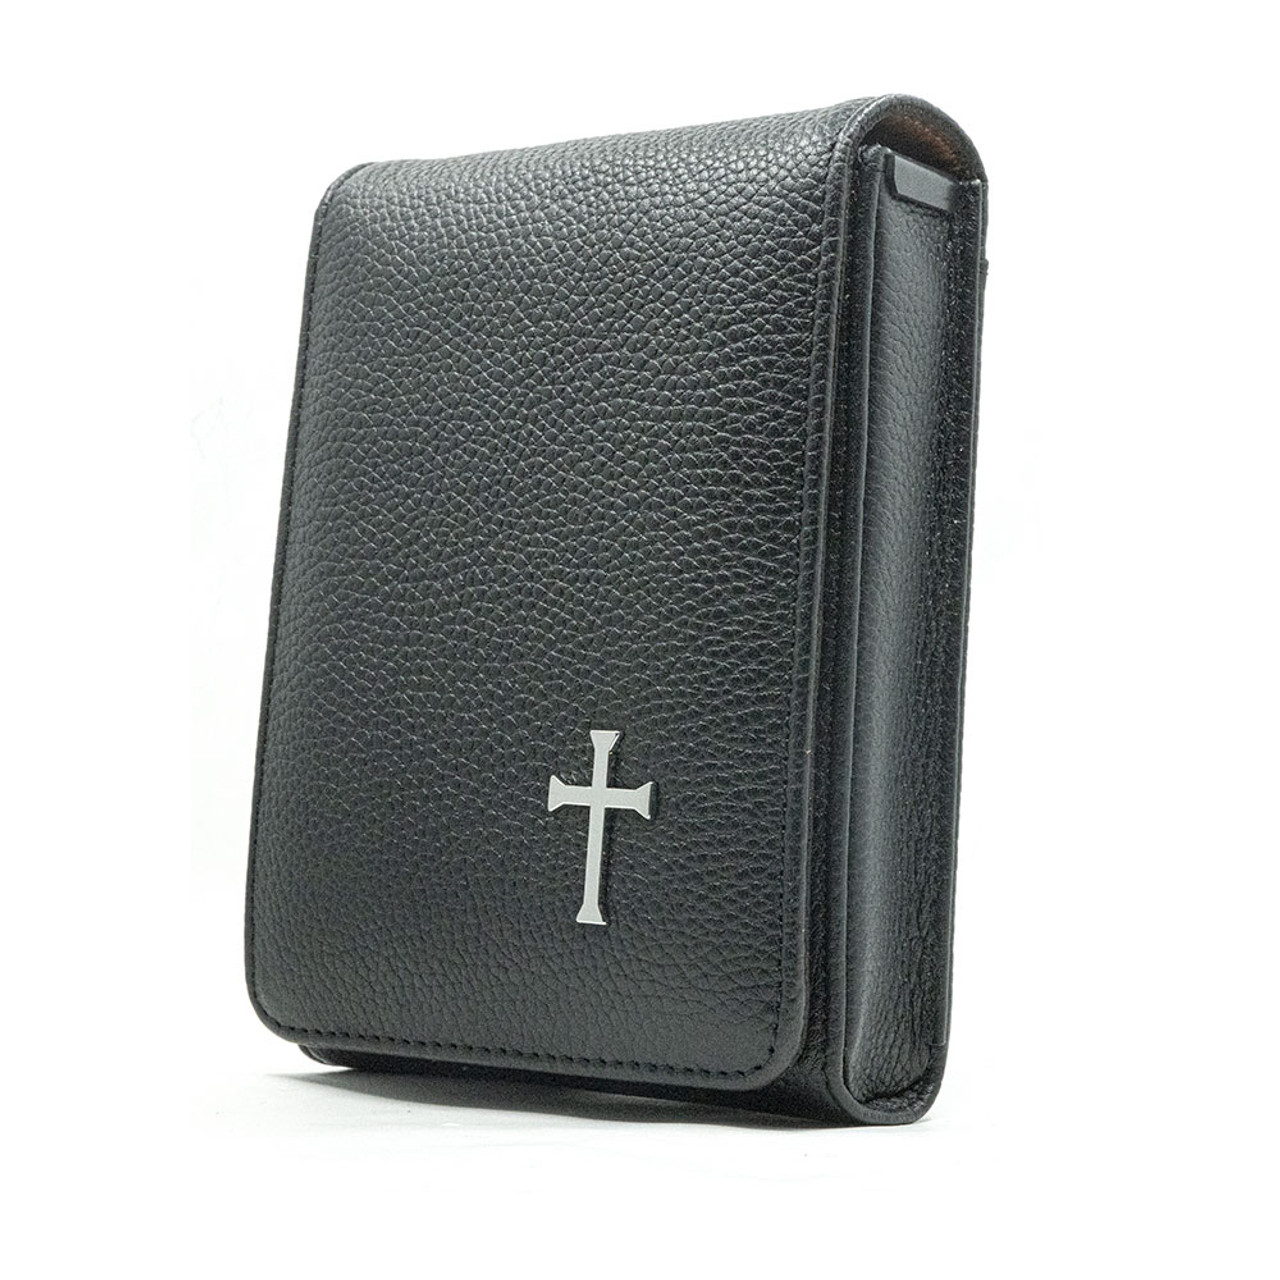 Black Leather Cross Series Holster for the Glock 31